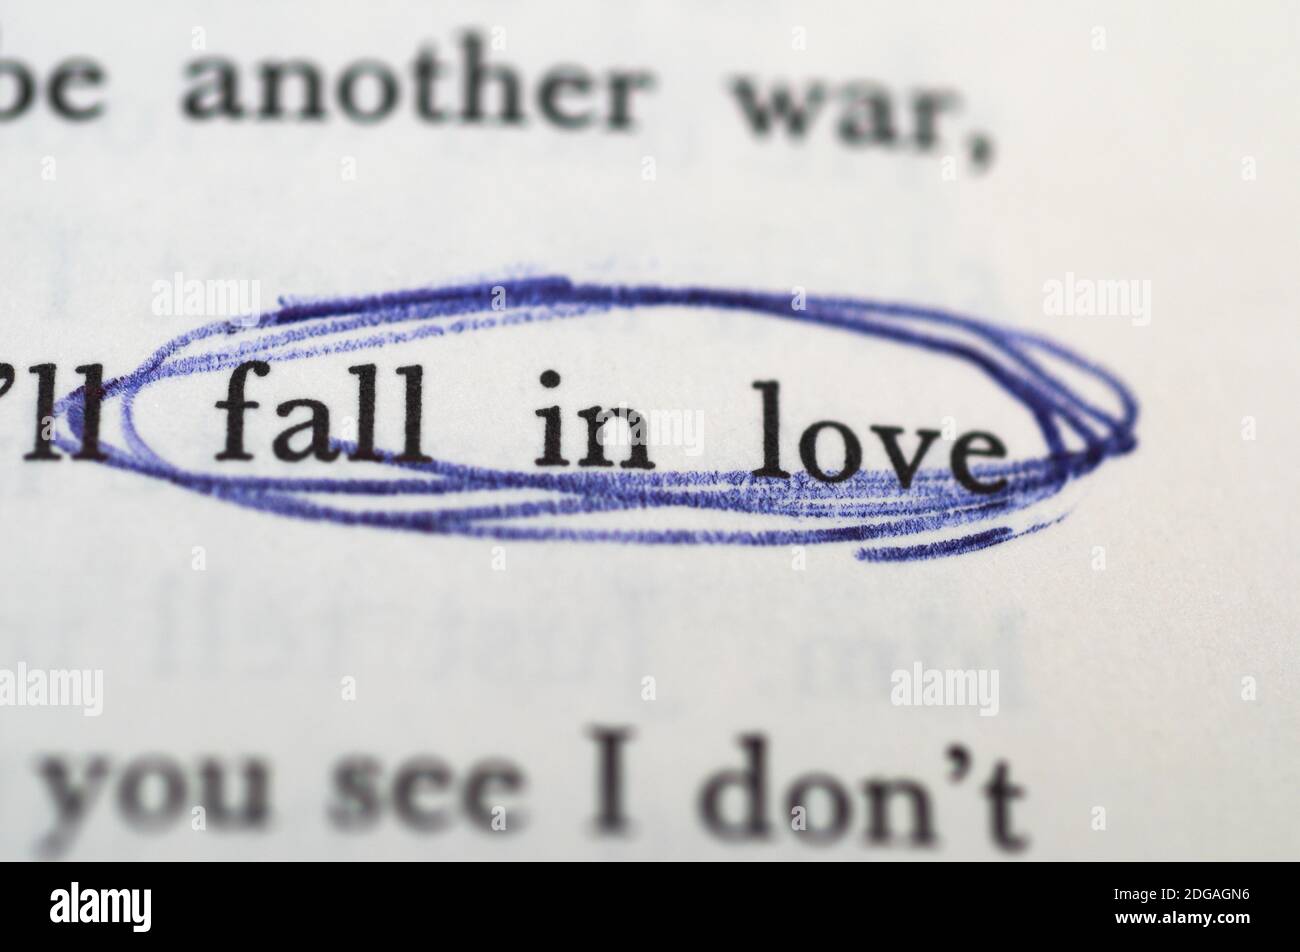 fall in love circled on book page Stock Photo